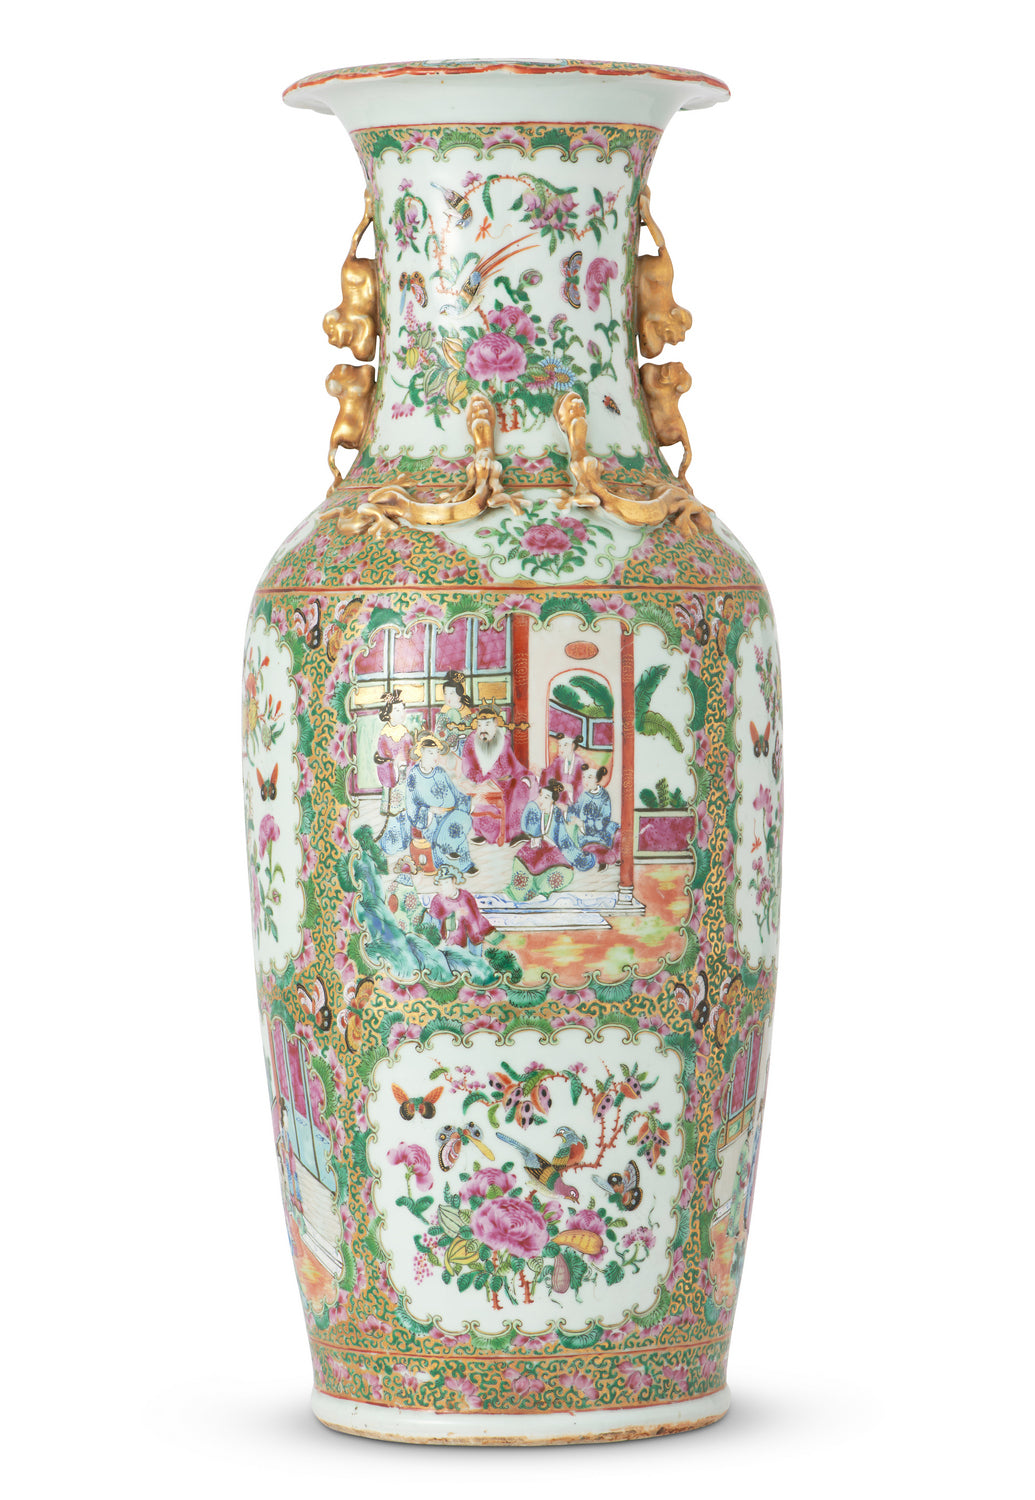 A LARGE CHINESE CANTON ROSE MEDALLION VASE QING DYNASTY (1644-1912), 19TH CENTURY